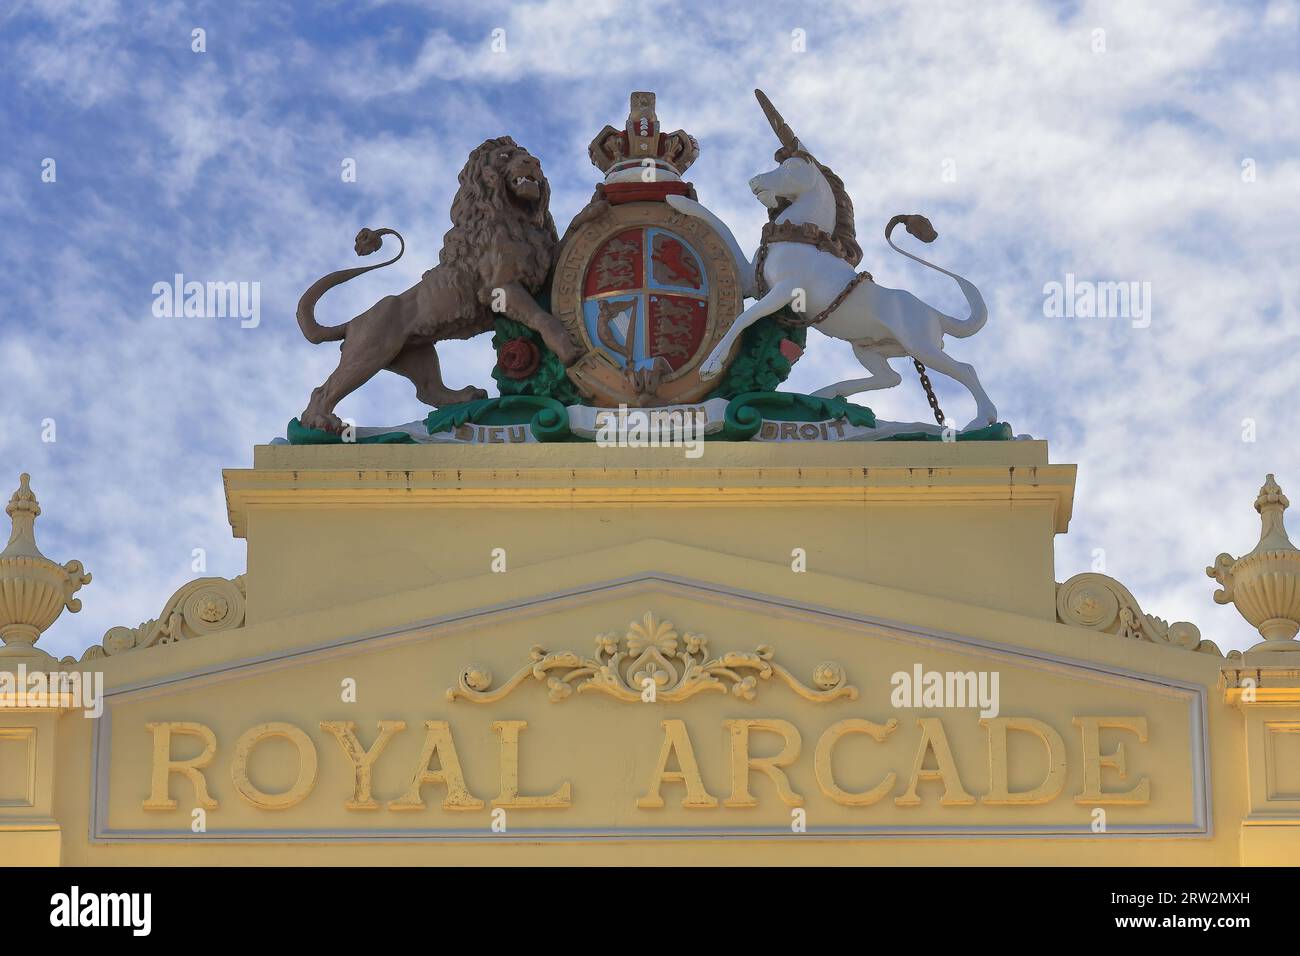 936 United Kingdom royal coat of arms atop The Royal Arcade's Bourke St.facade, Australia's oldest extant shopping arcade. Melbourne. Stock Photo